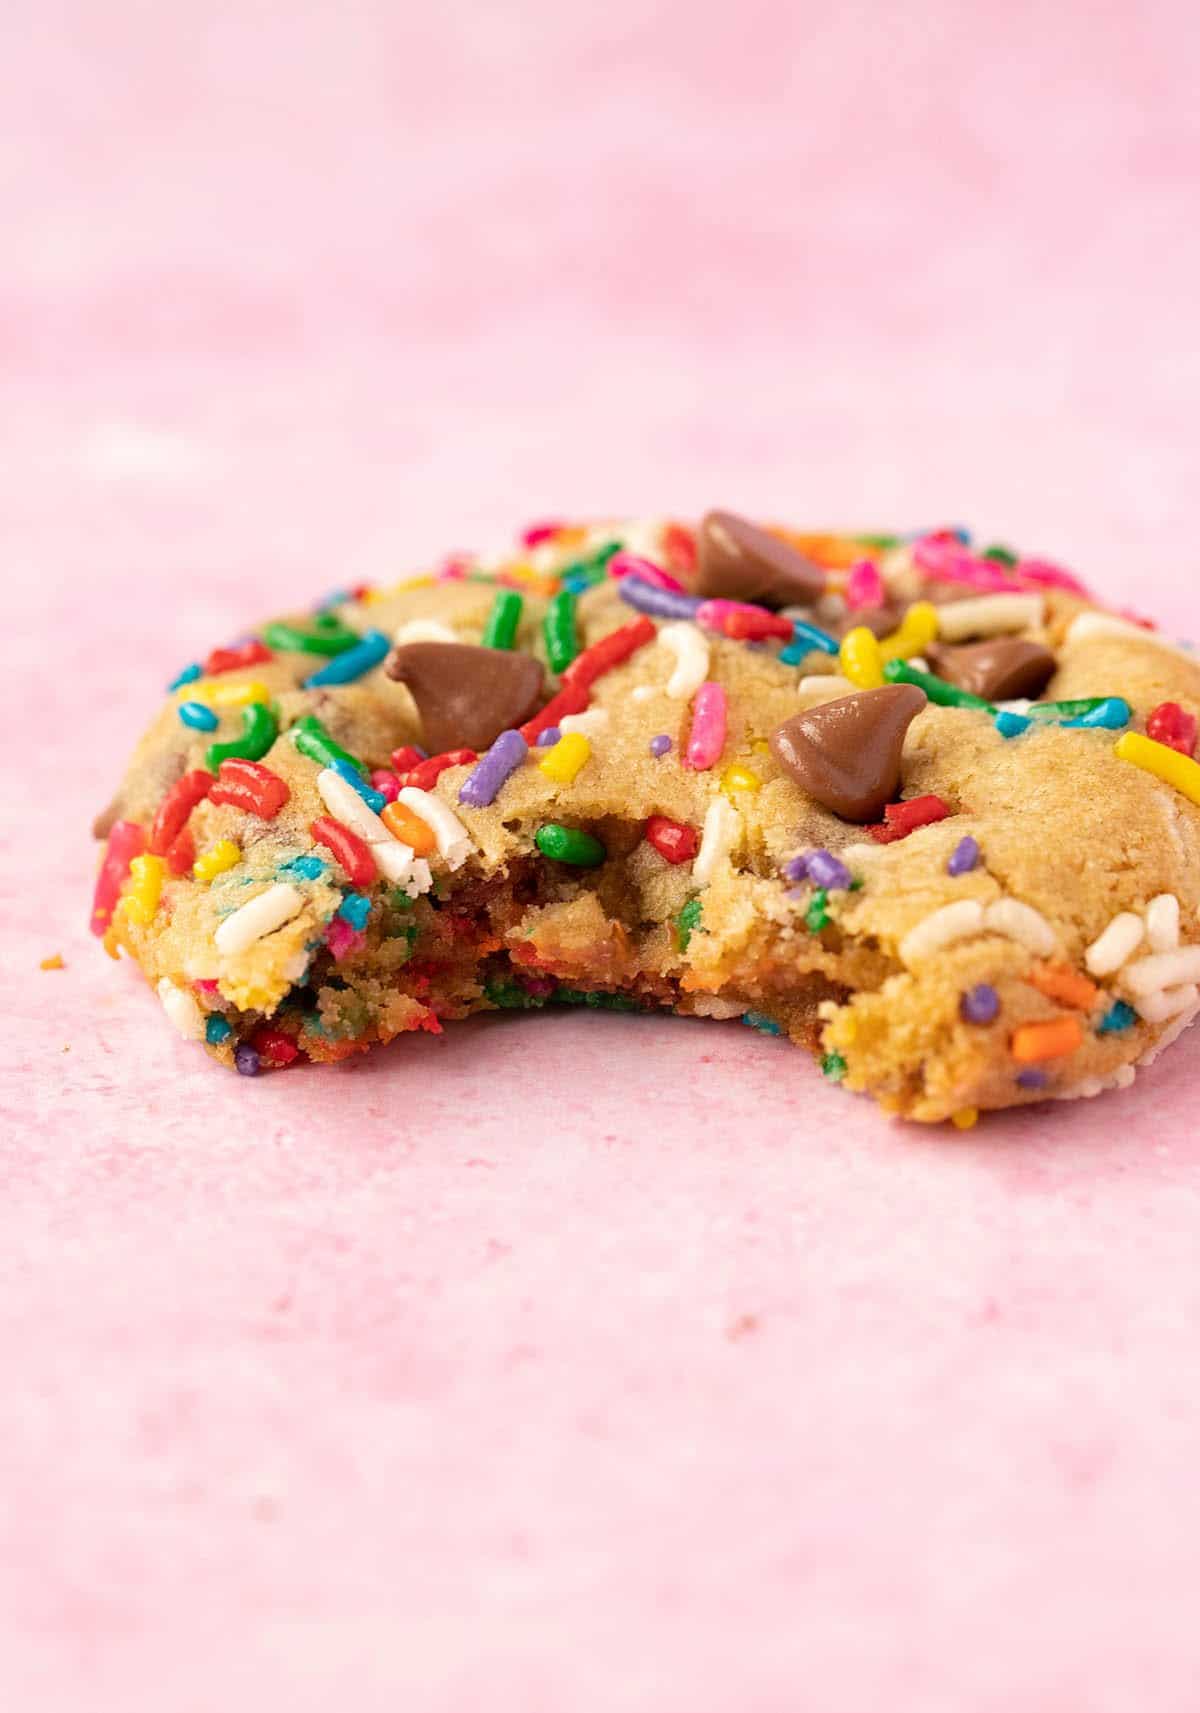  A Funfetti Chocolate Chip Cookie with a bite taken out it on a pink background.